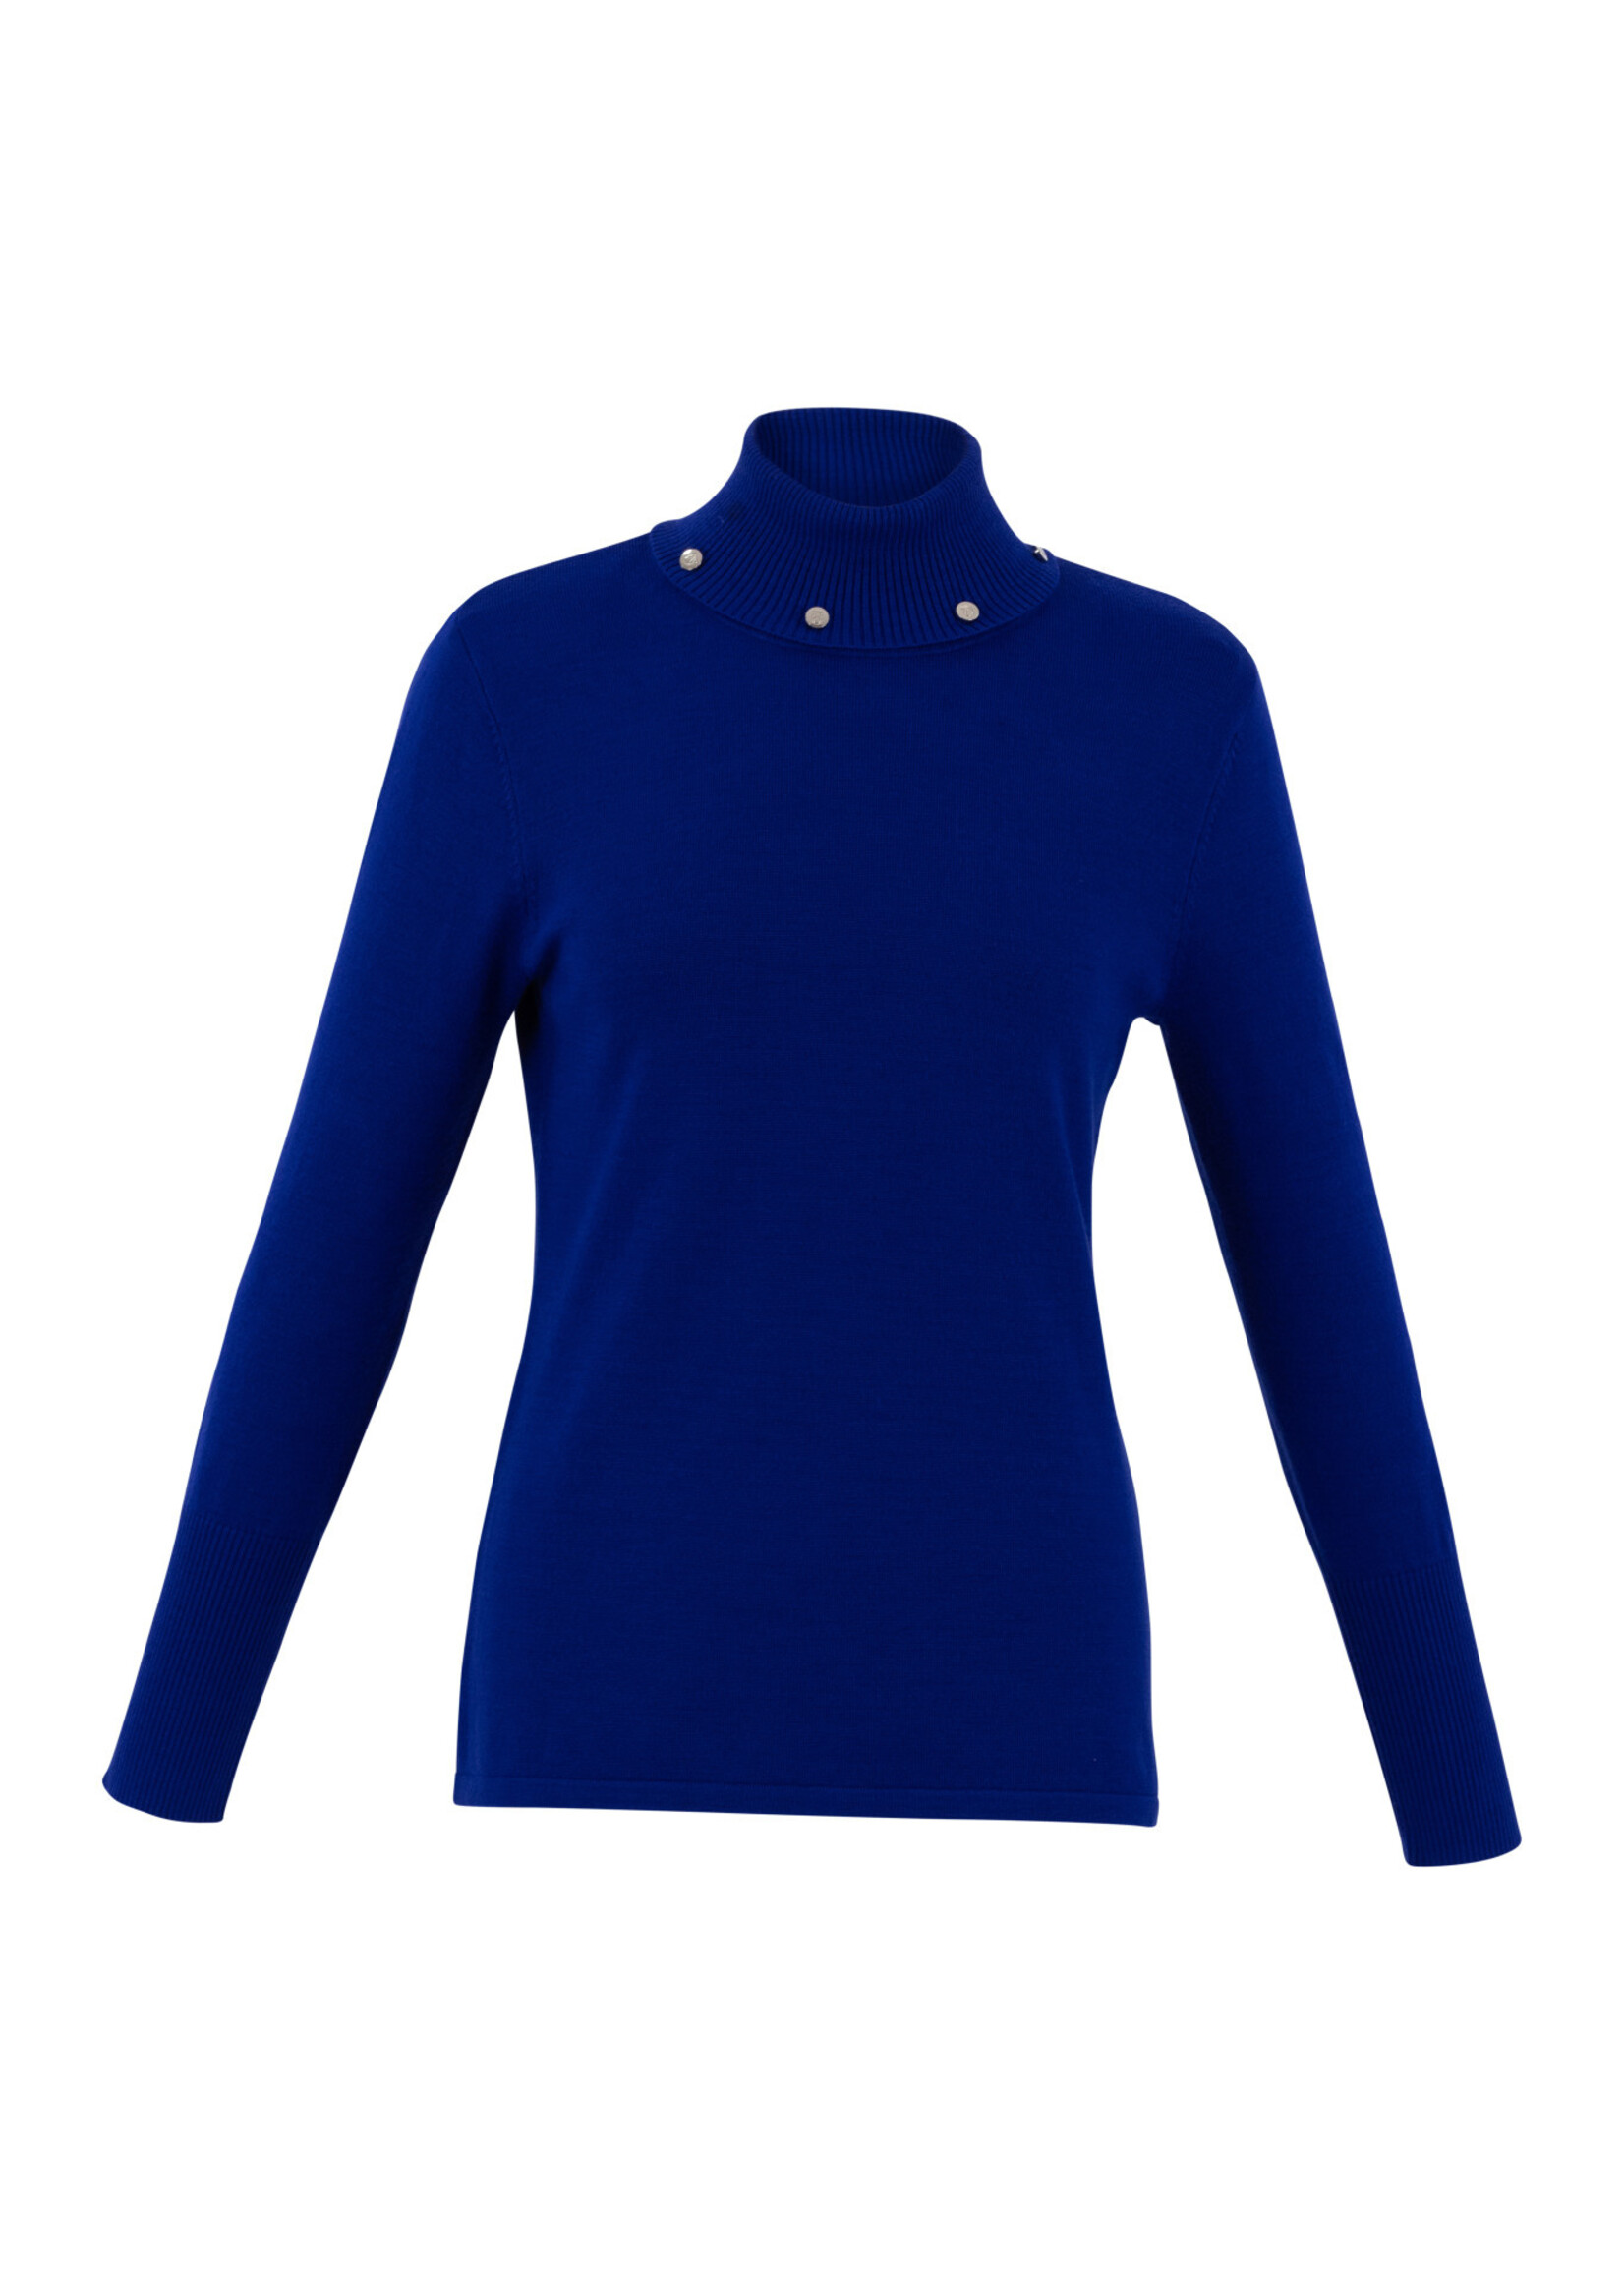 Marble Marble Turtleneck Sweater w/Button Detail Royal Blue